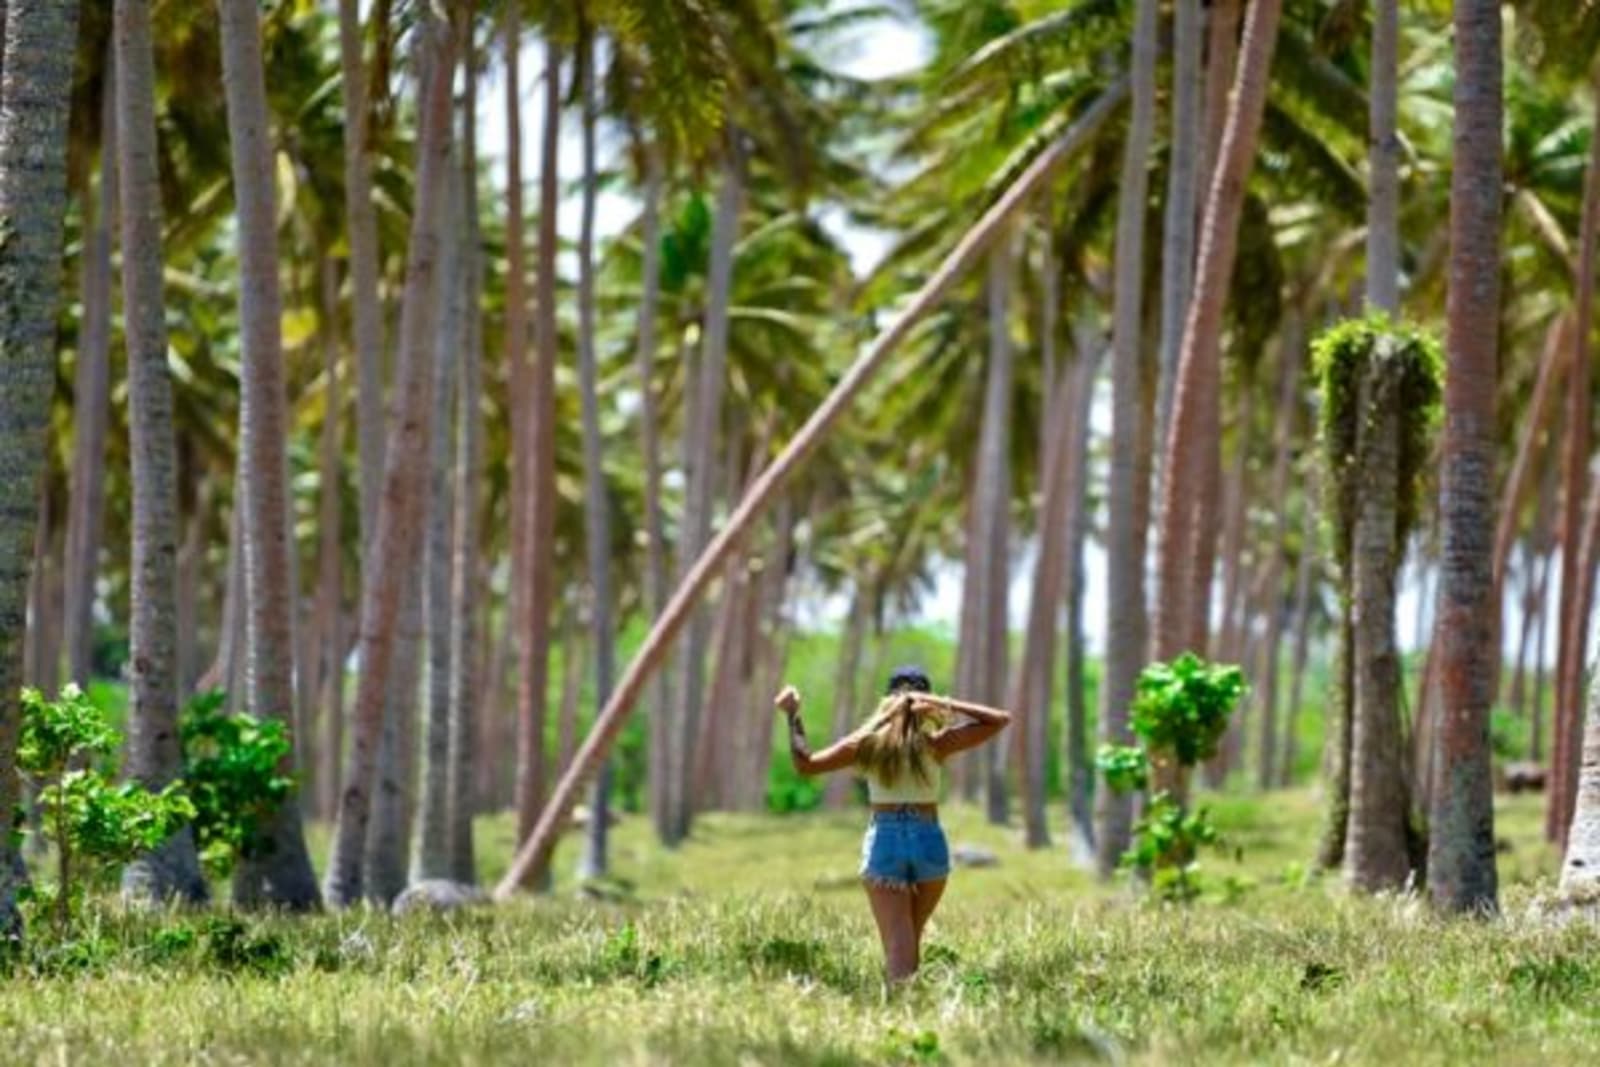 Woman walking through a line of palm trees